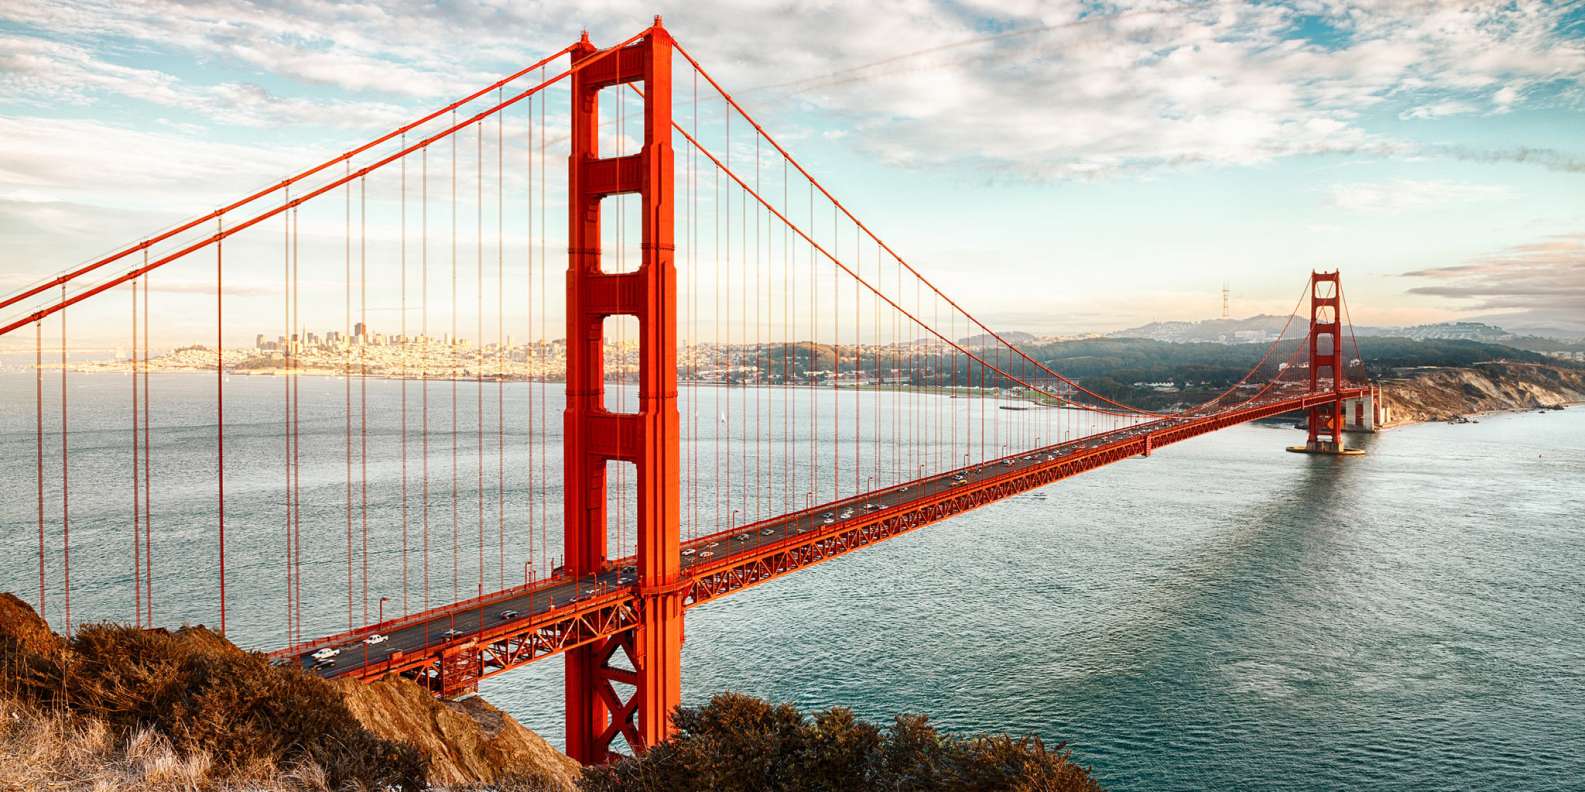 The Complete Guide to Walking the Golden Gate Bridge: A Bay Area